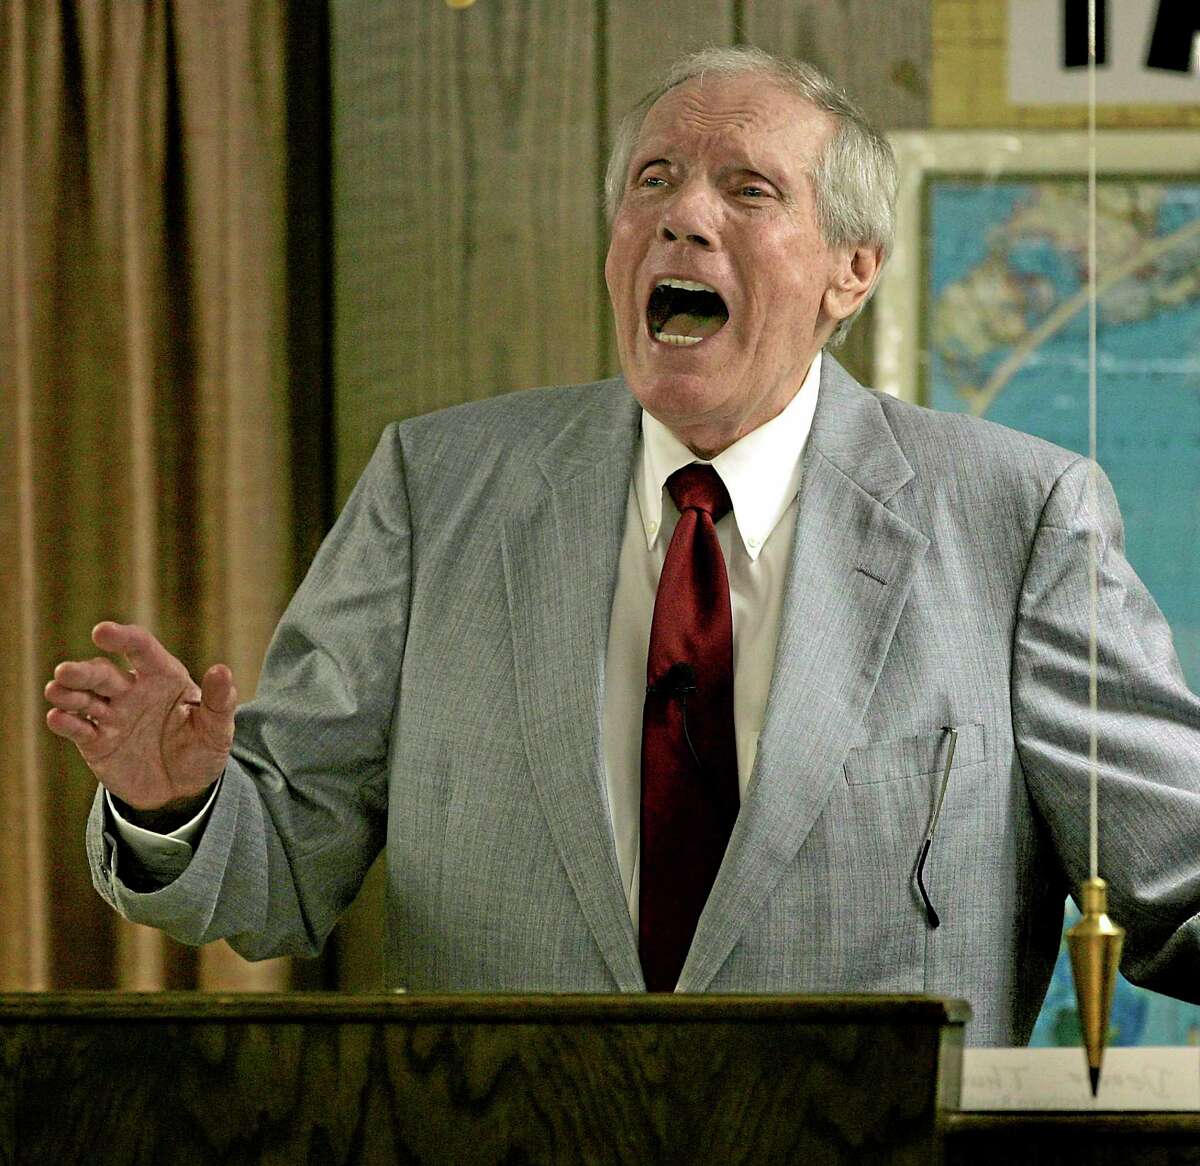 In this March 19, 2006, file photo, Rev. Fred Phelps Sr. preaches at his Westboro Baptist Church in Topeka, Kansas. Phelps, who founded a Kansas church that ís widely known for its anti-gar protests at military funerals, has died.